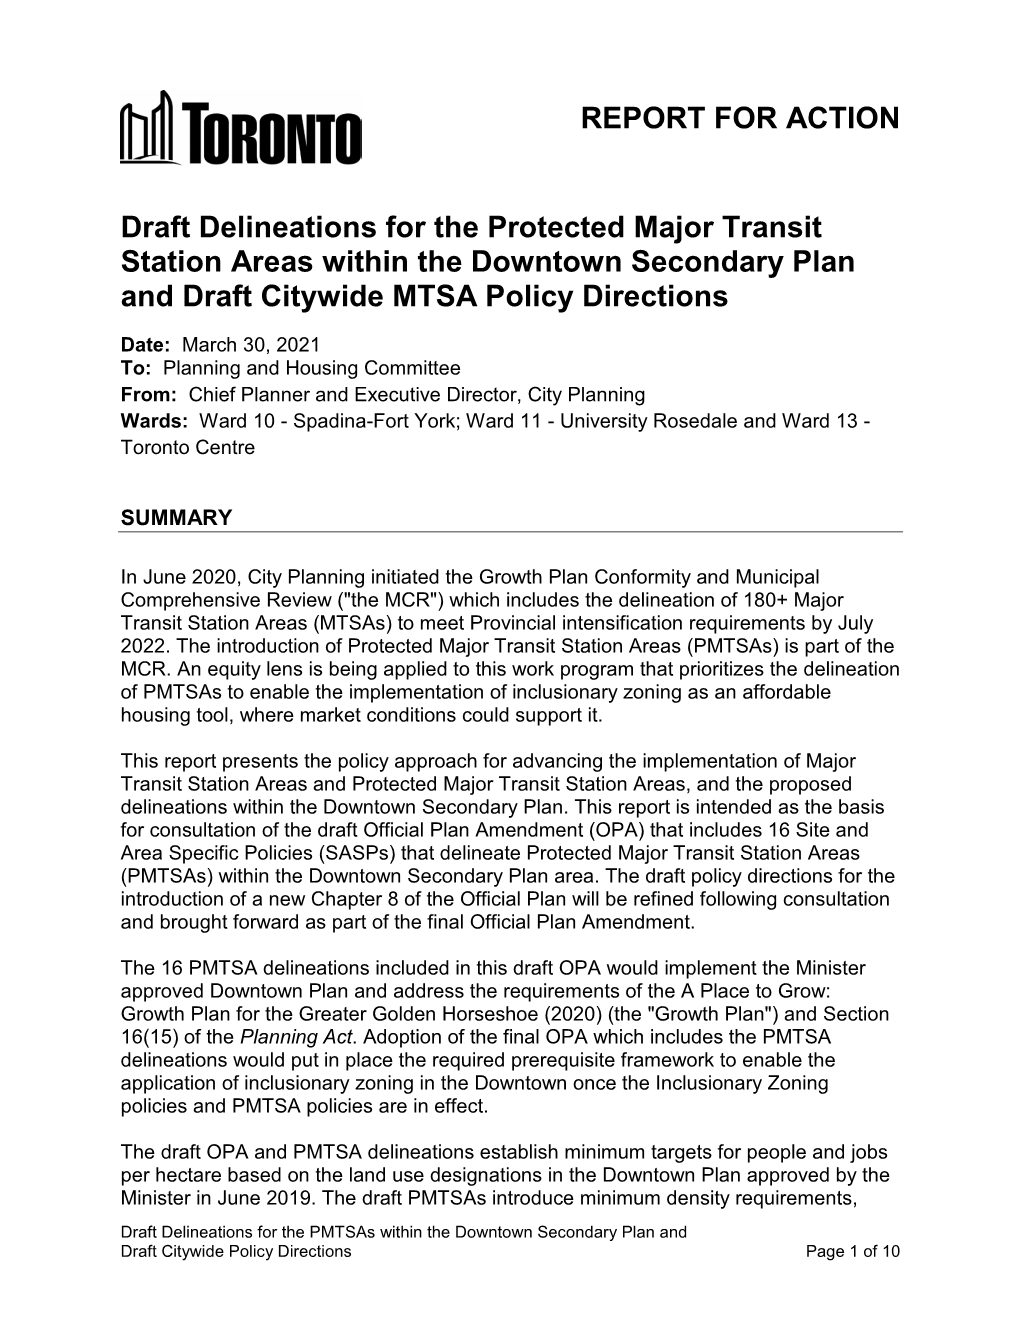 Draft Delineations for the Protected Major Transit Station Areas Within the Downtown Secondary Plan and Draft Citywide MTSA Policy Directions